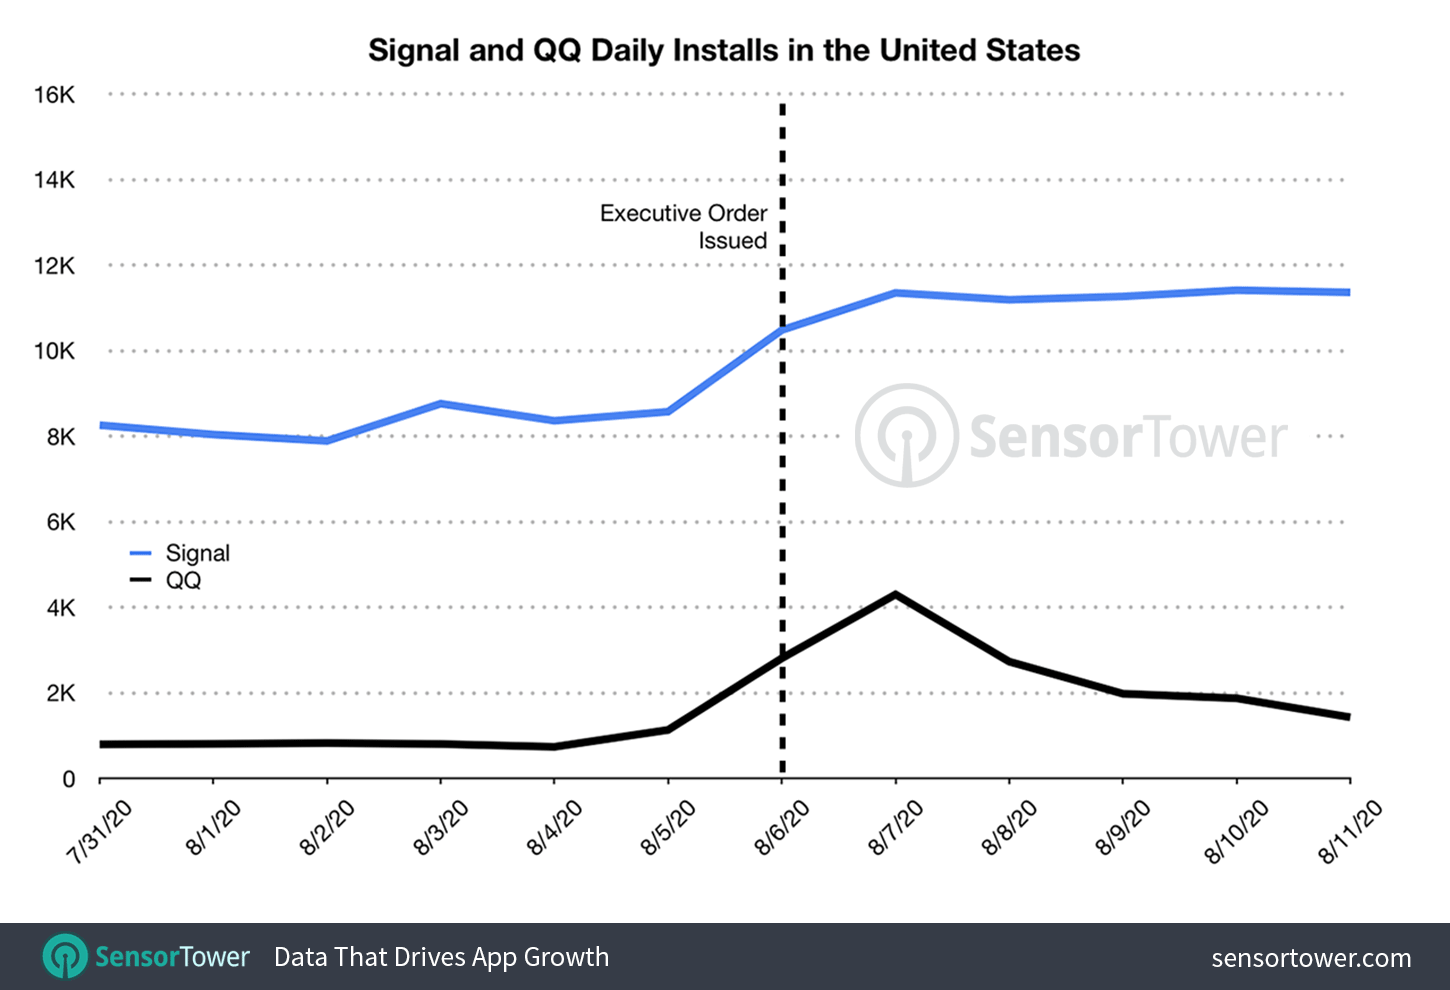 Signal's installs grew 30% in the six days following the August 6 executive order